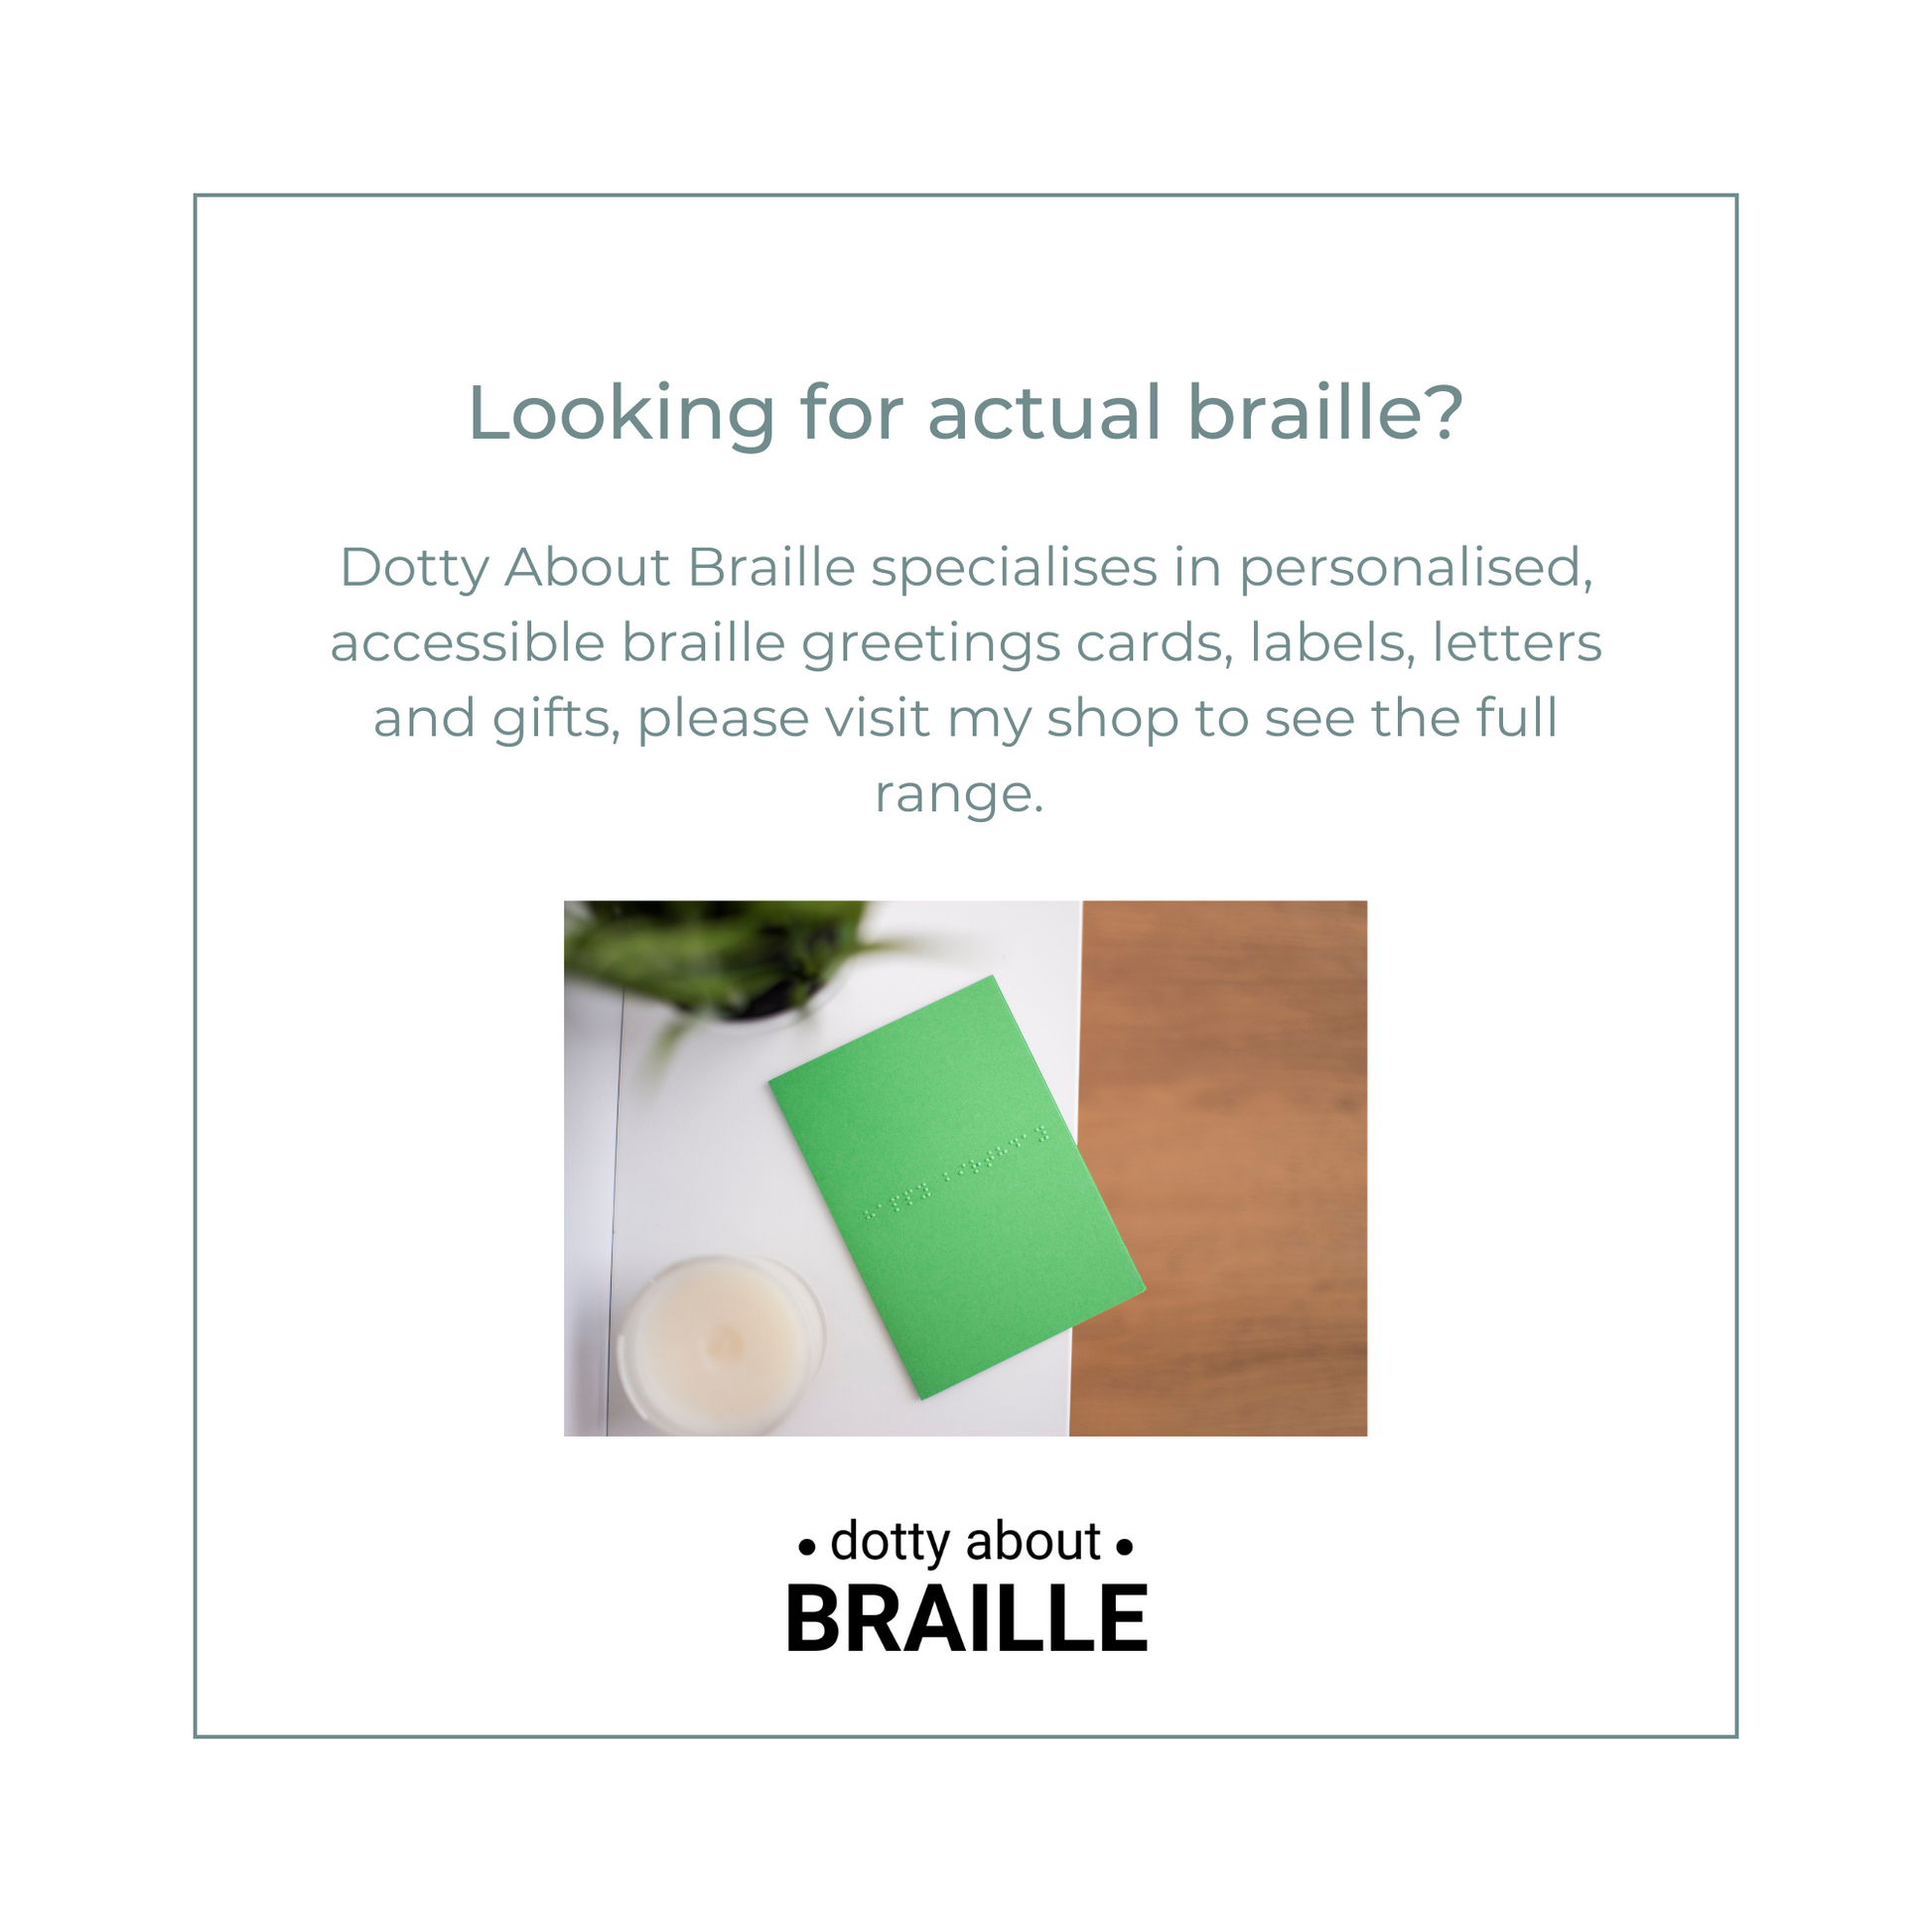 Looking for actual braille? Dotty About Braille specialises in personalised, accessible braille greetings cards, labels, letters and gifts, please visit my shop to see the full range. 